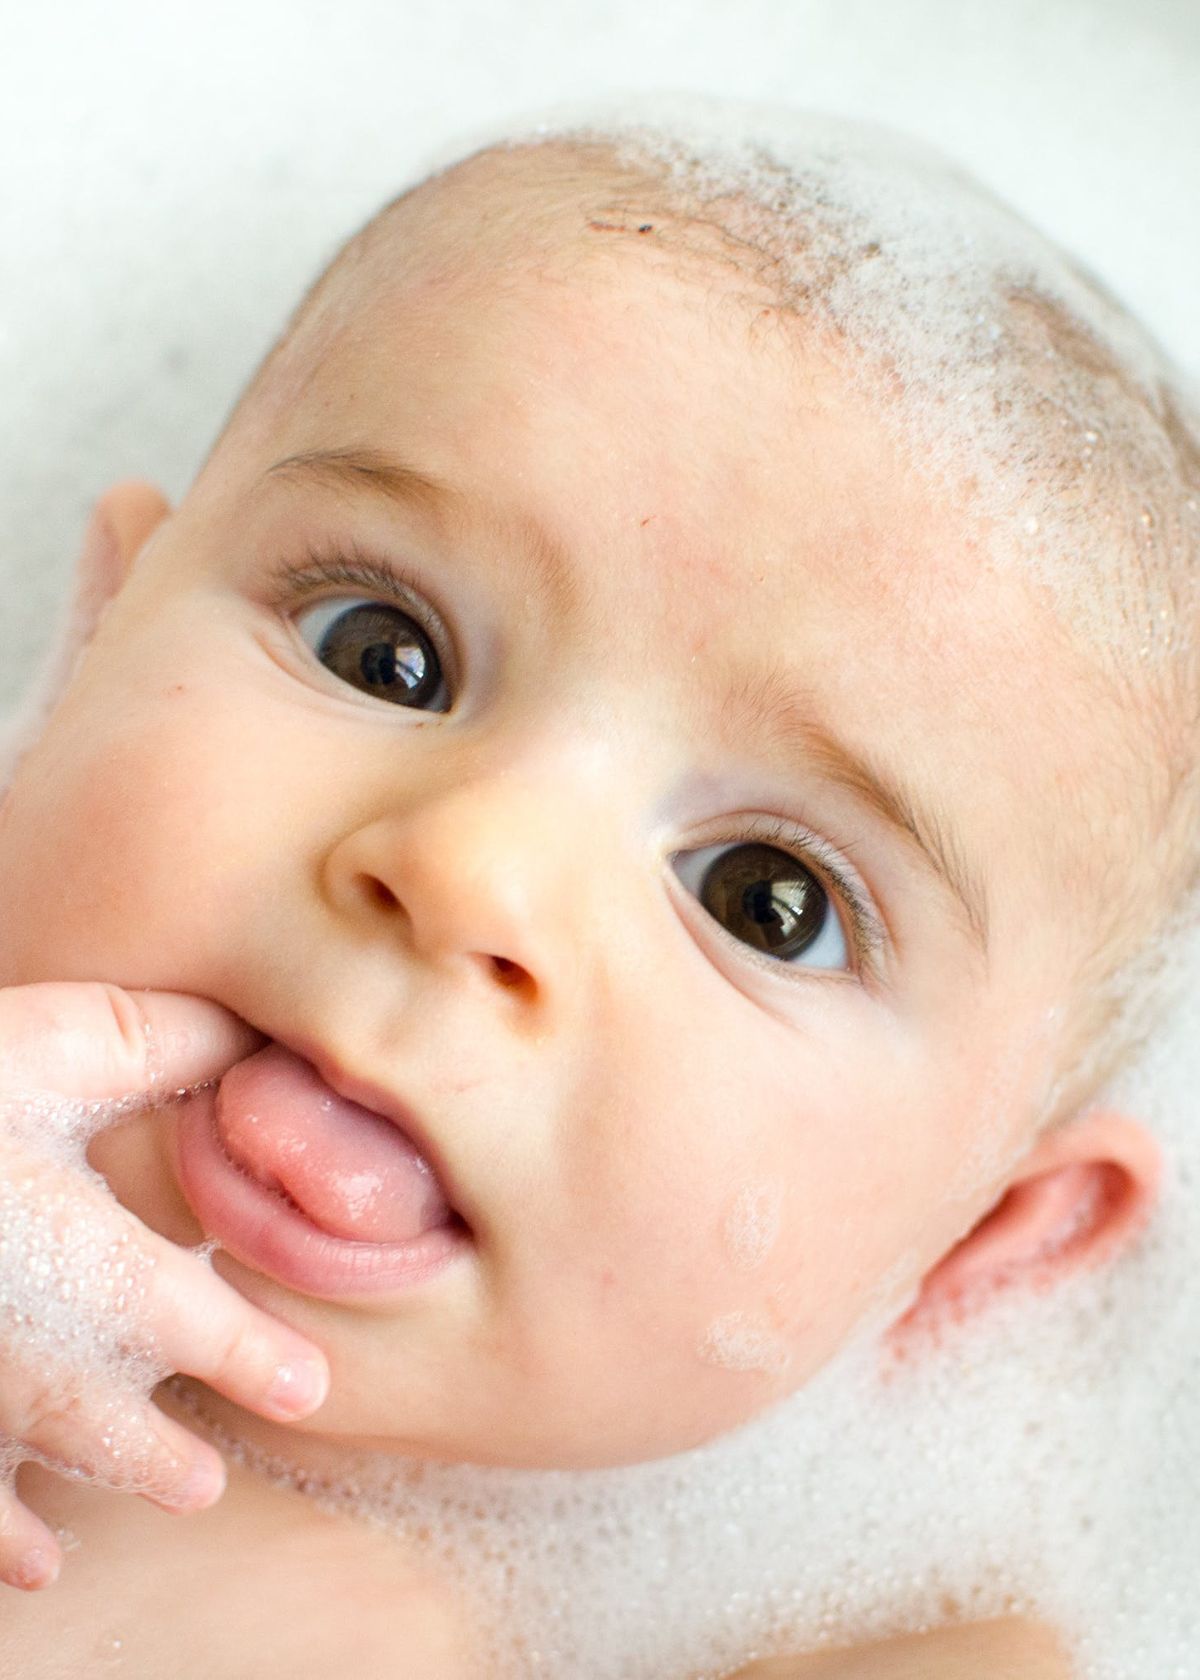 Best Organic Baby Shampoo: Top 6 Safe and Clean Choices